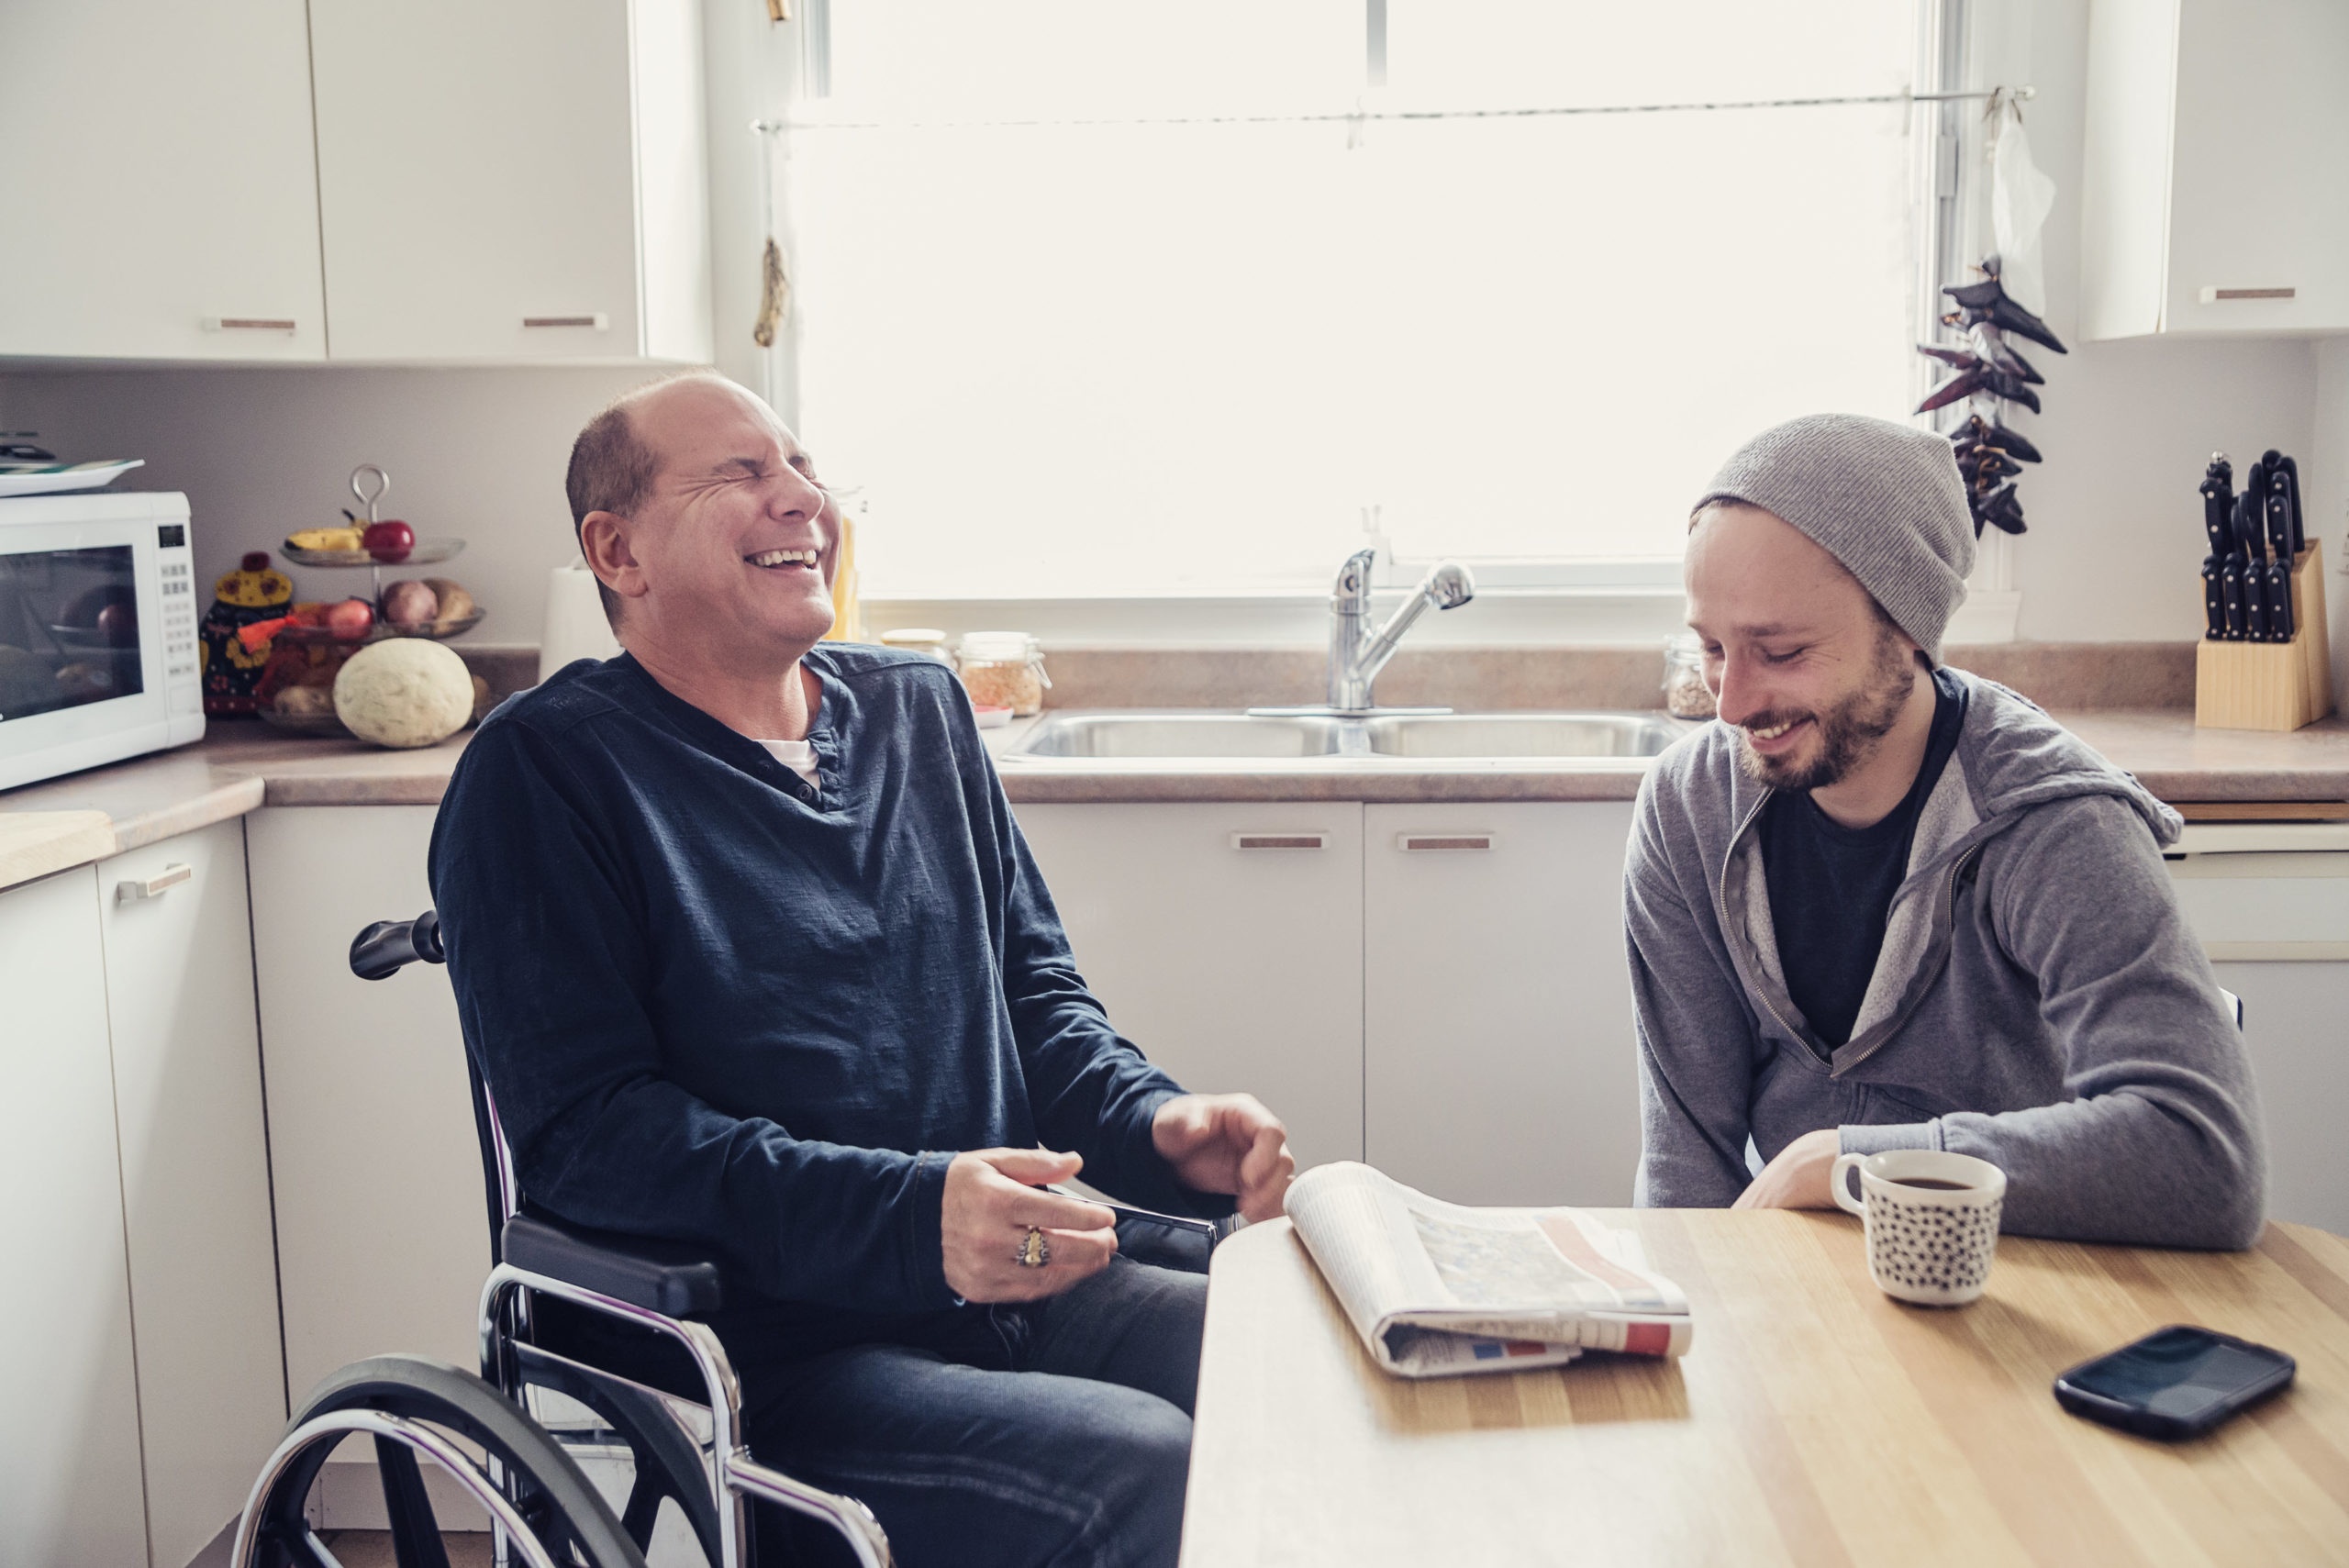 older man seated in wheelcheer laughs with younger man in the kitchen